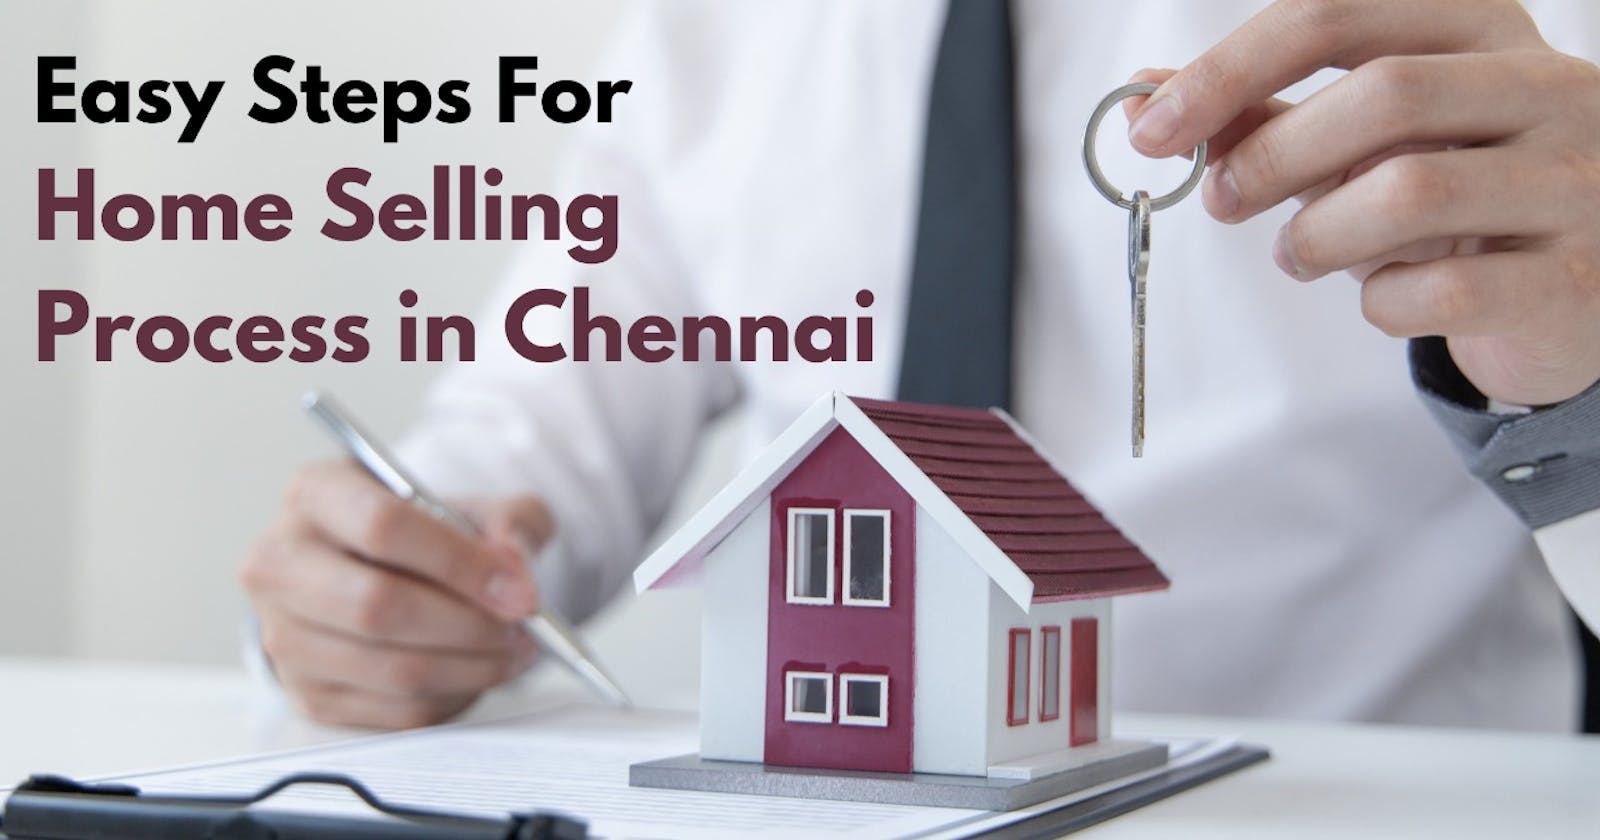 Easy Steps for Selling a House in Chennai